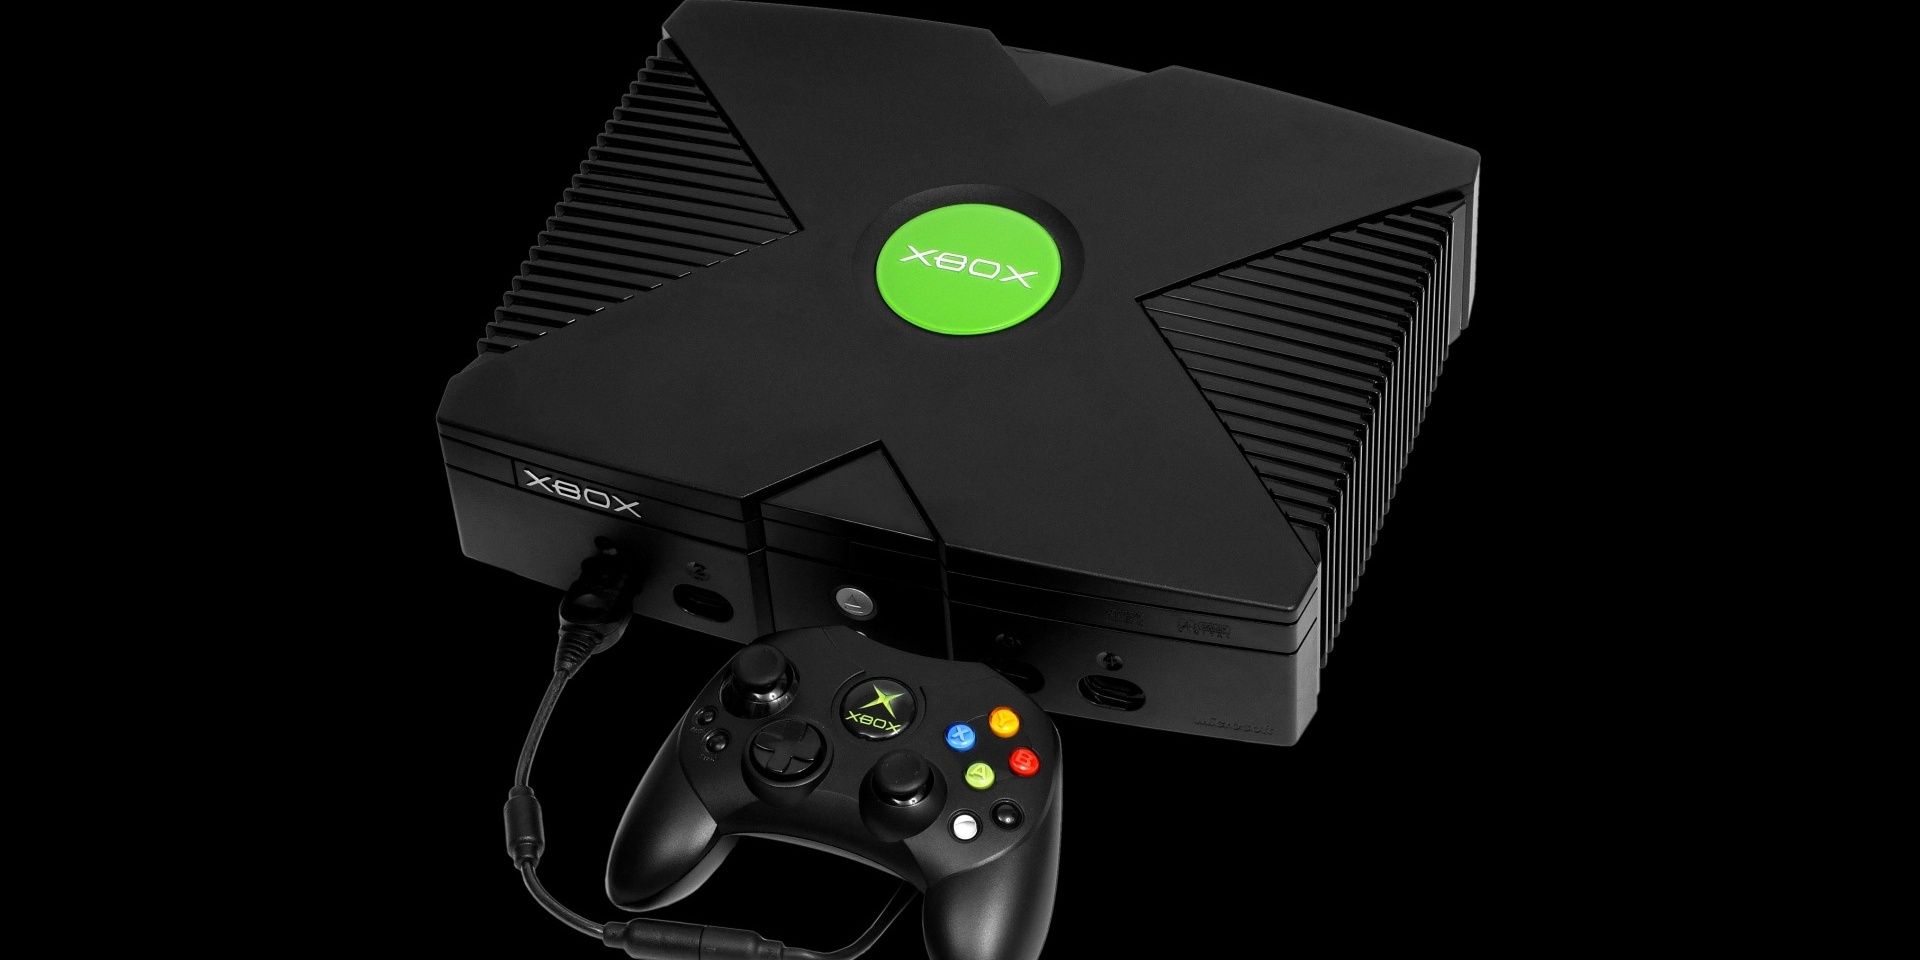 Image Of The Original Xbox And Controller From Microsoft.